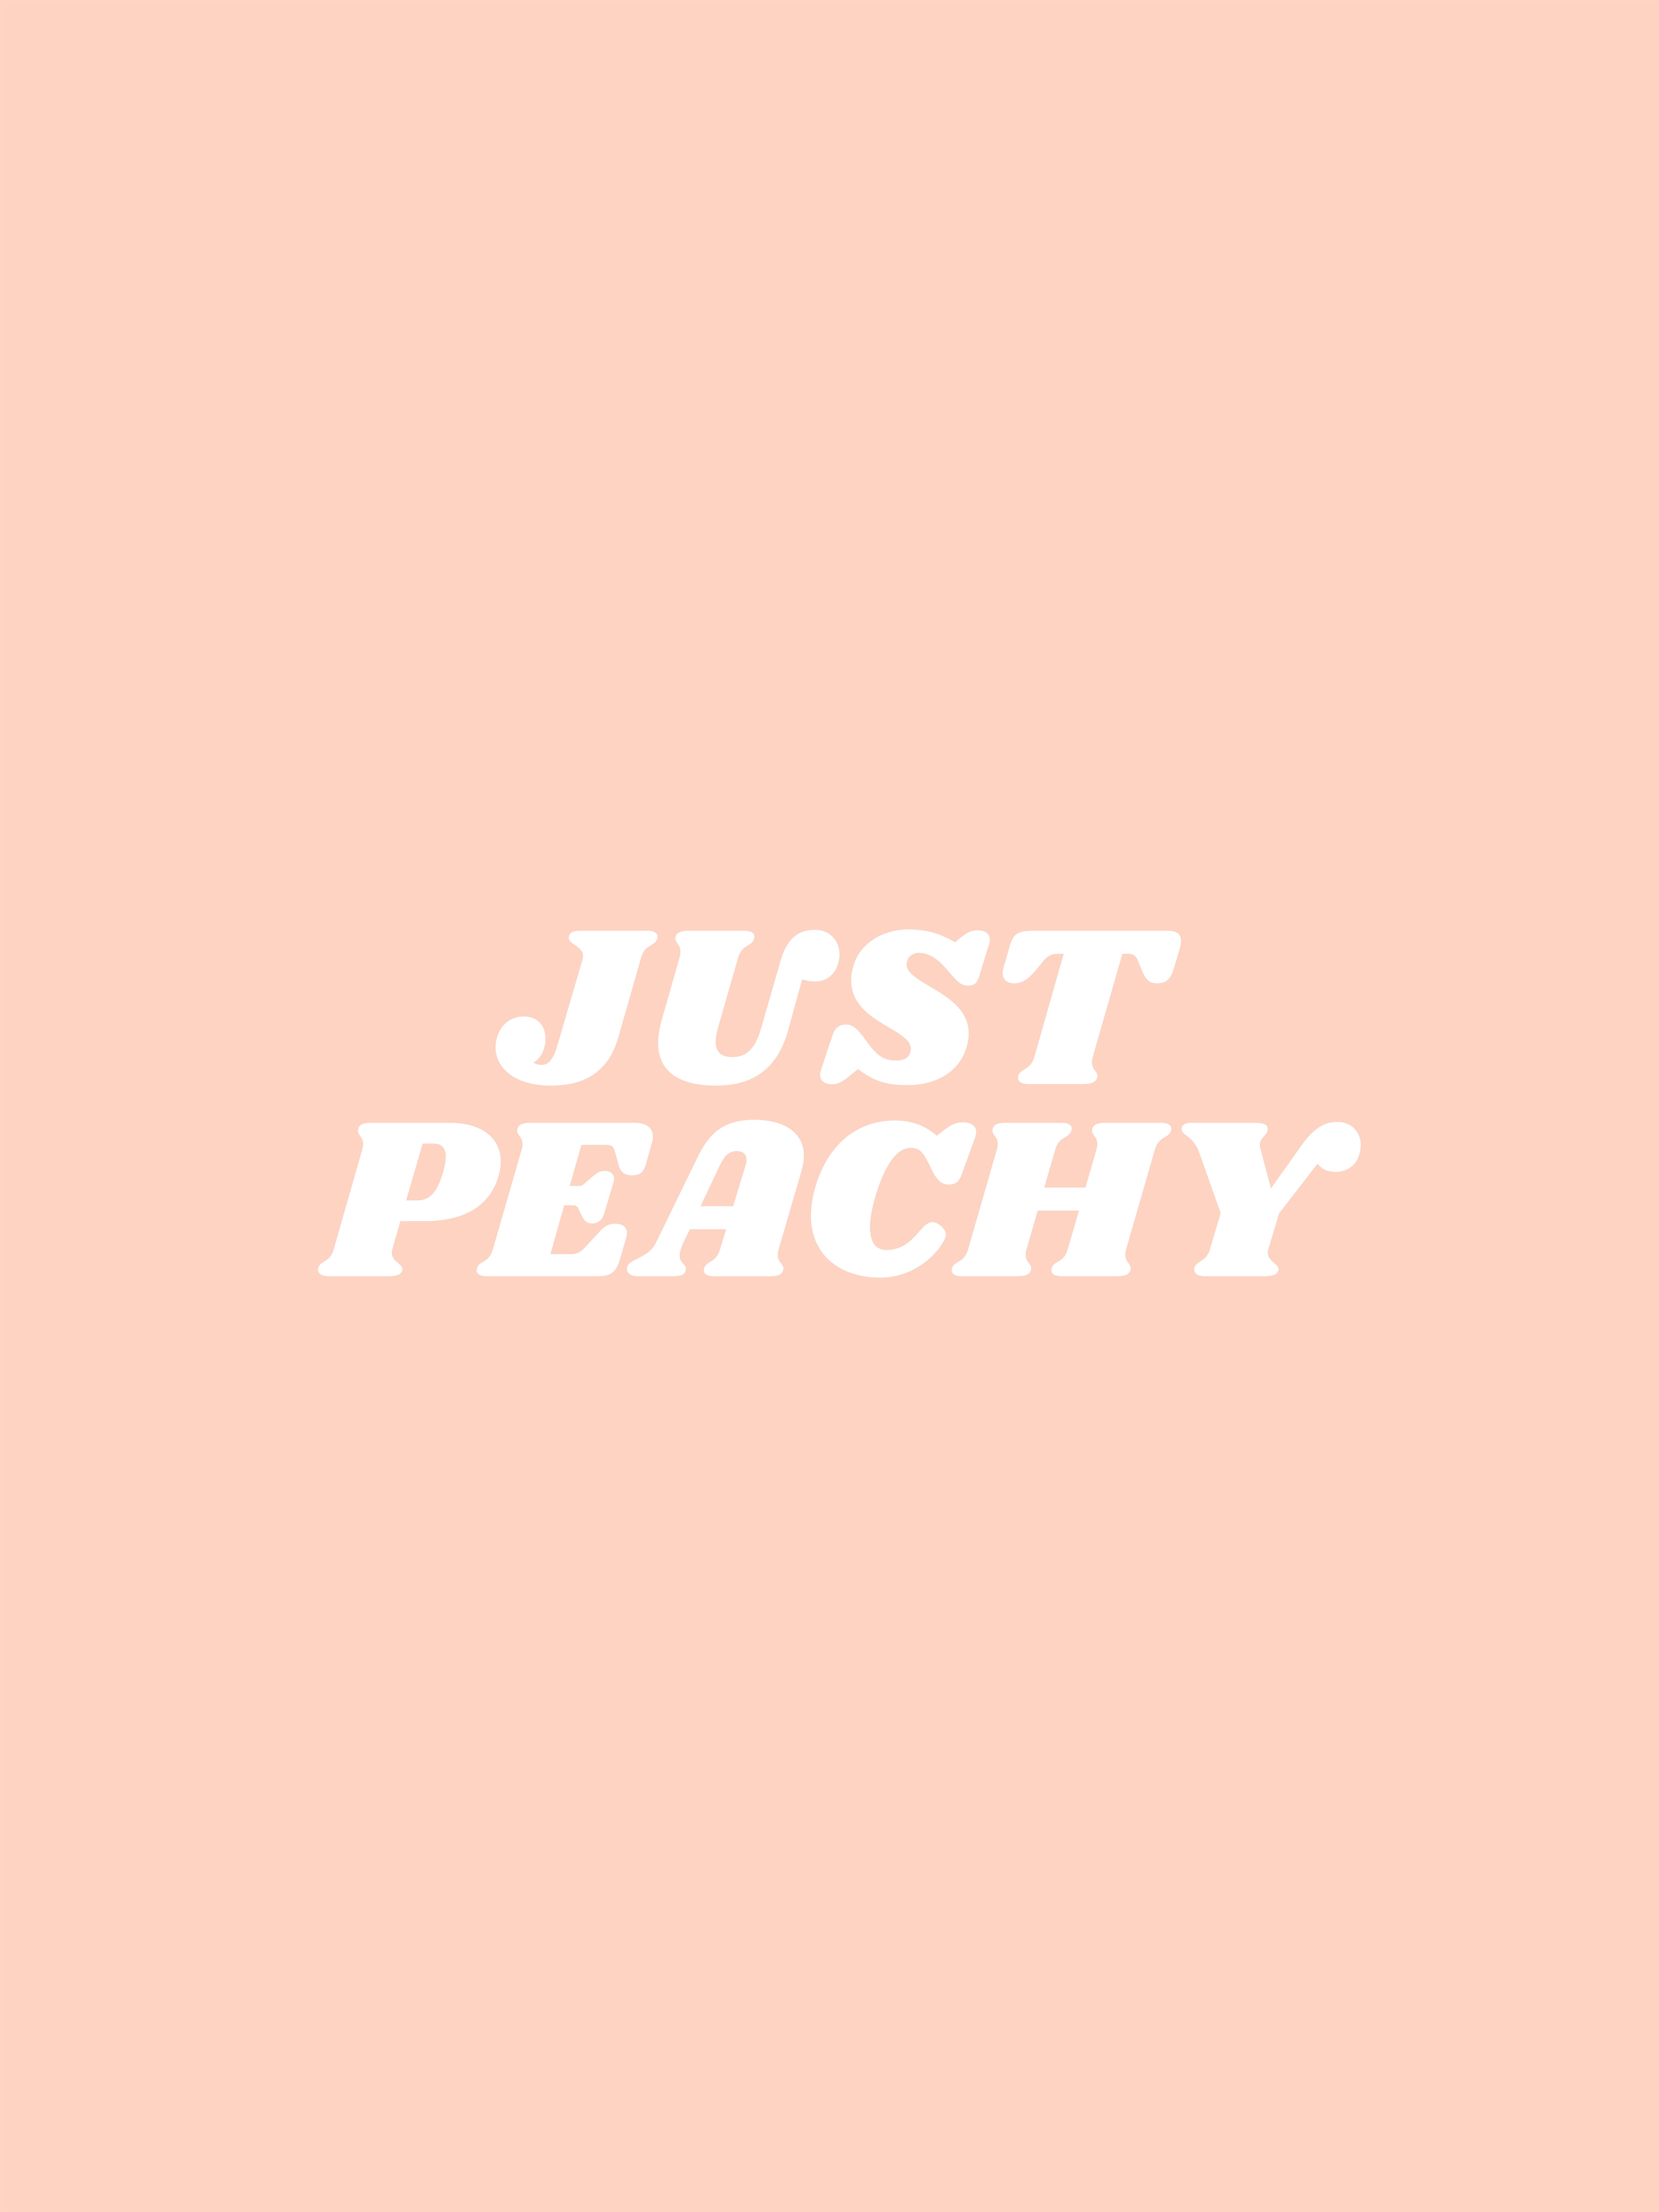 Just Peachy. Society6.com Typeangel. Inspirational And Positive